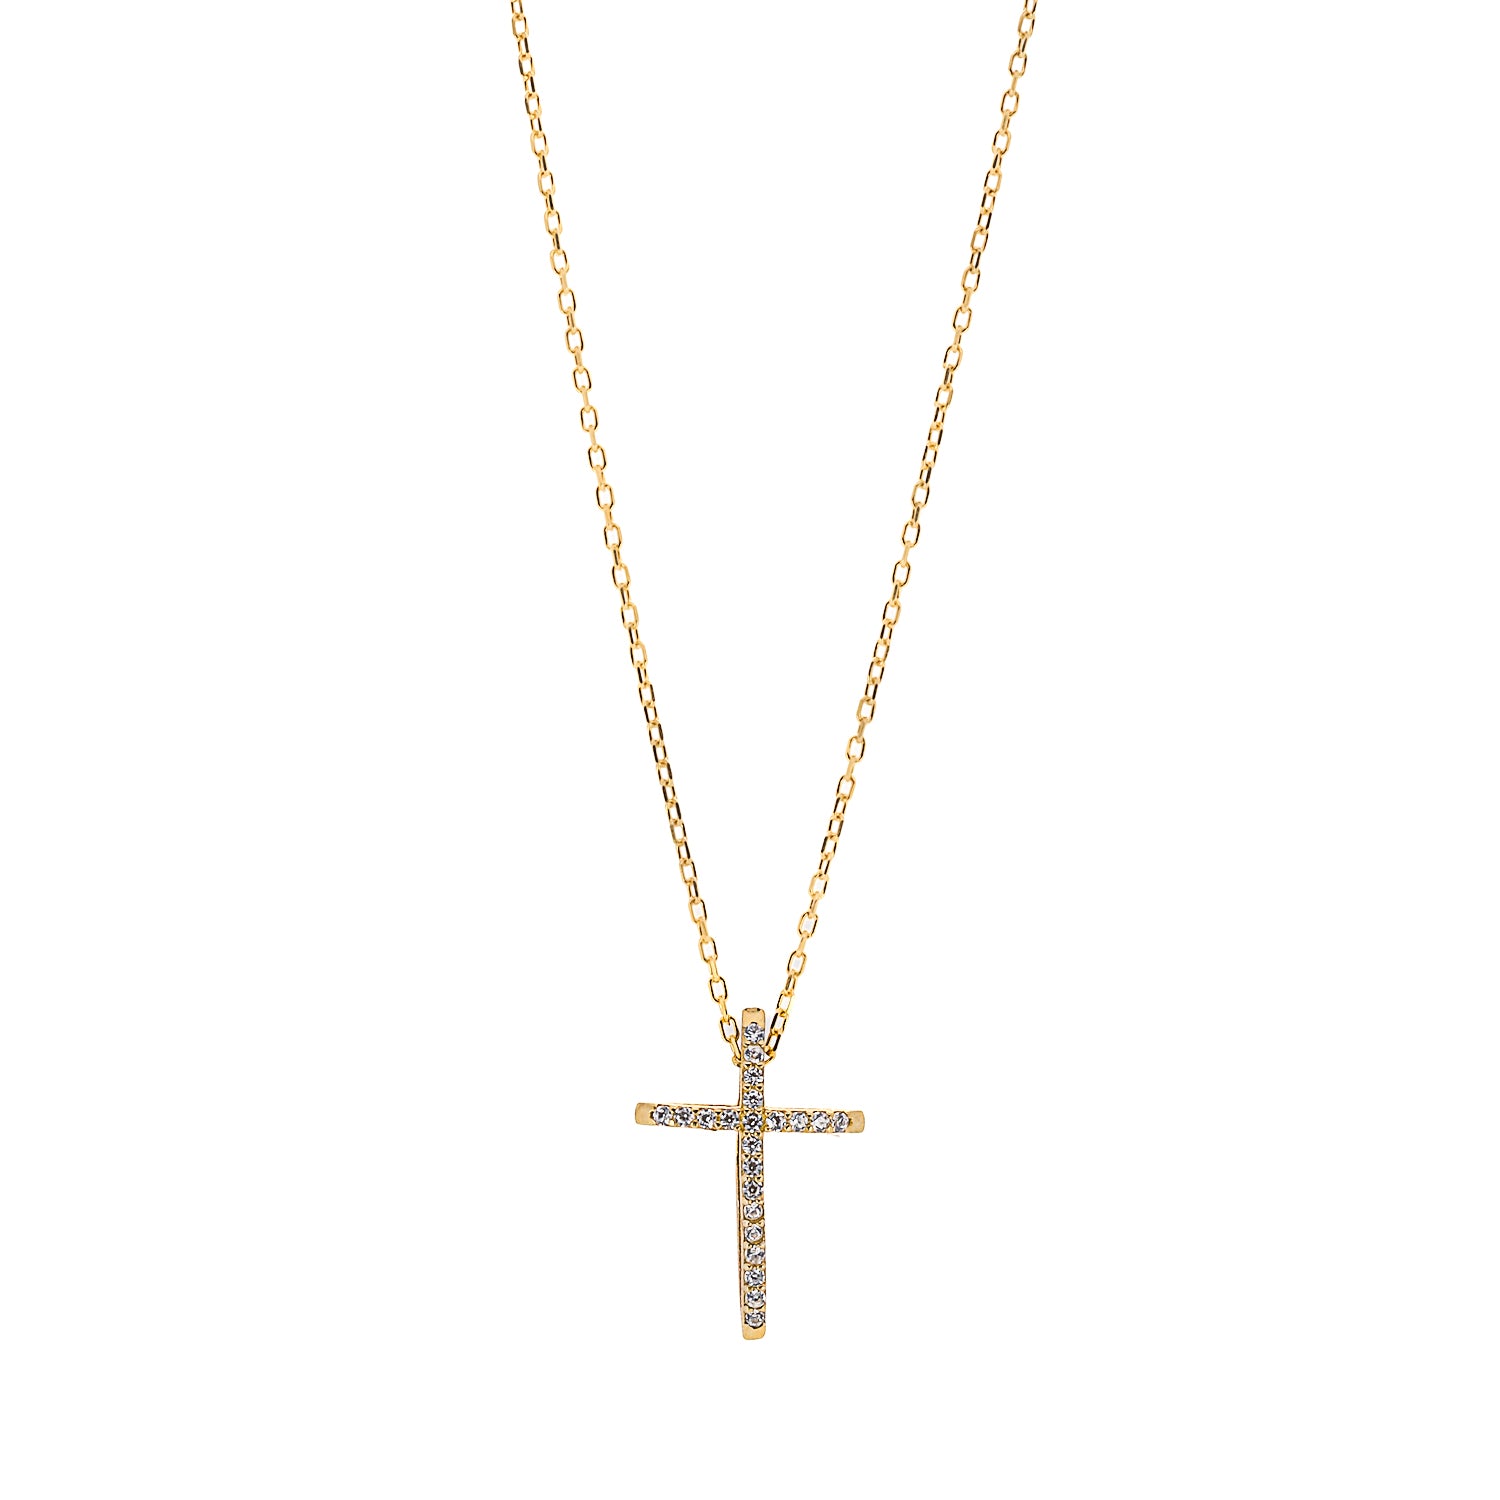 The Unique Cross Diamond Necklace, a harmonious blend of beauty and spiritual significance.